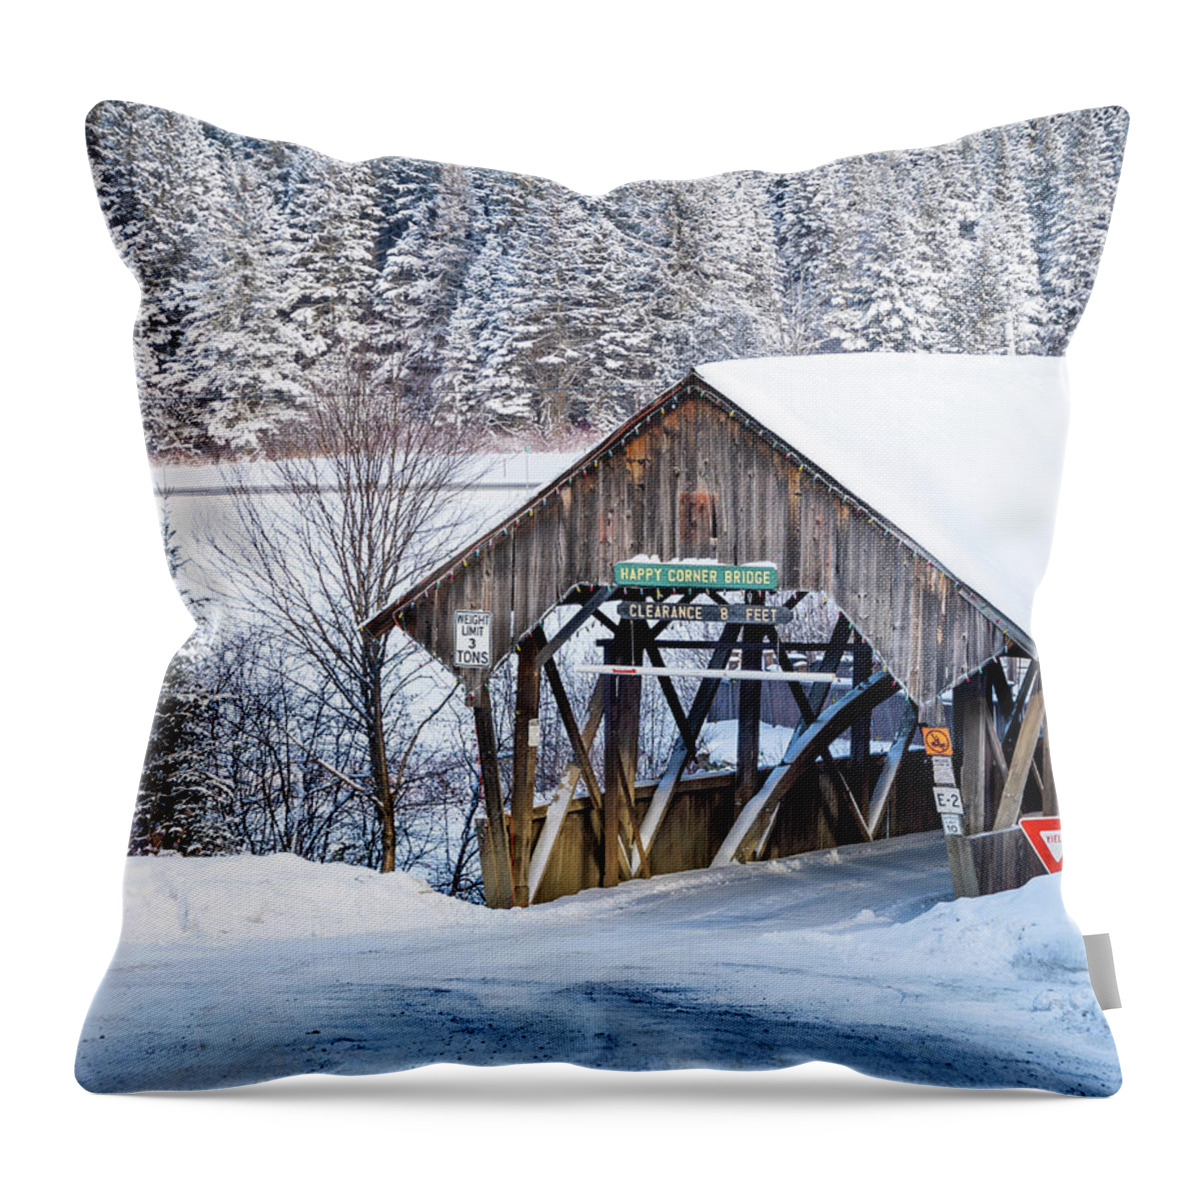 Covered Throw Pillow featuring the photograph Happy Corner Covered Bridge Vertical - Pittsburg, New Hampshire by John Rowe